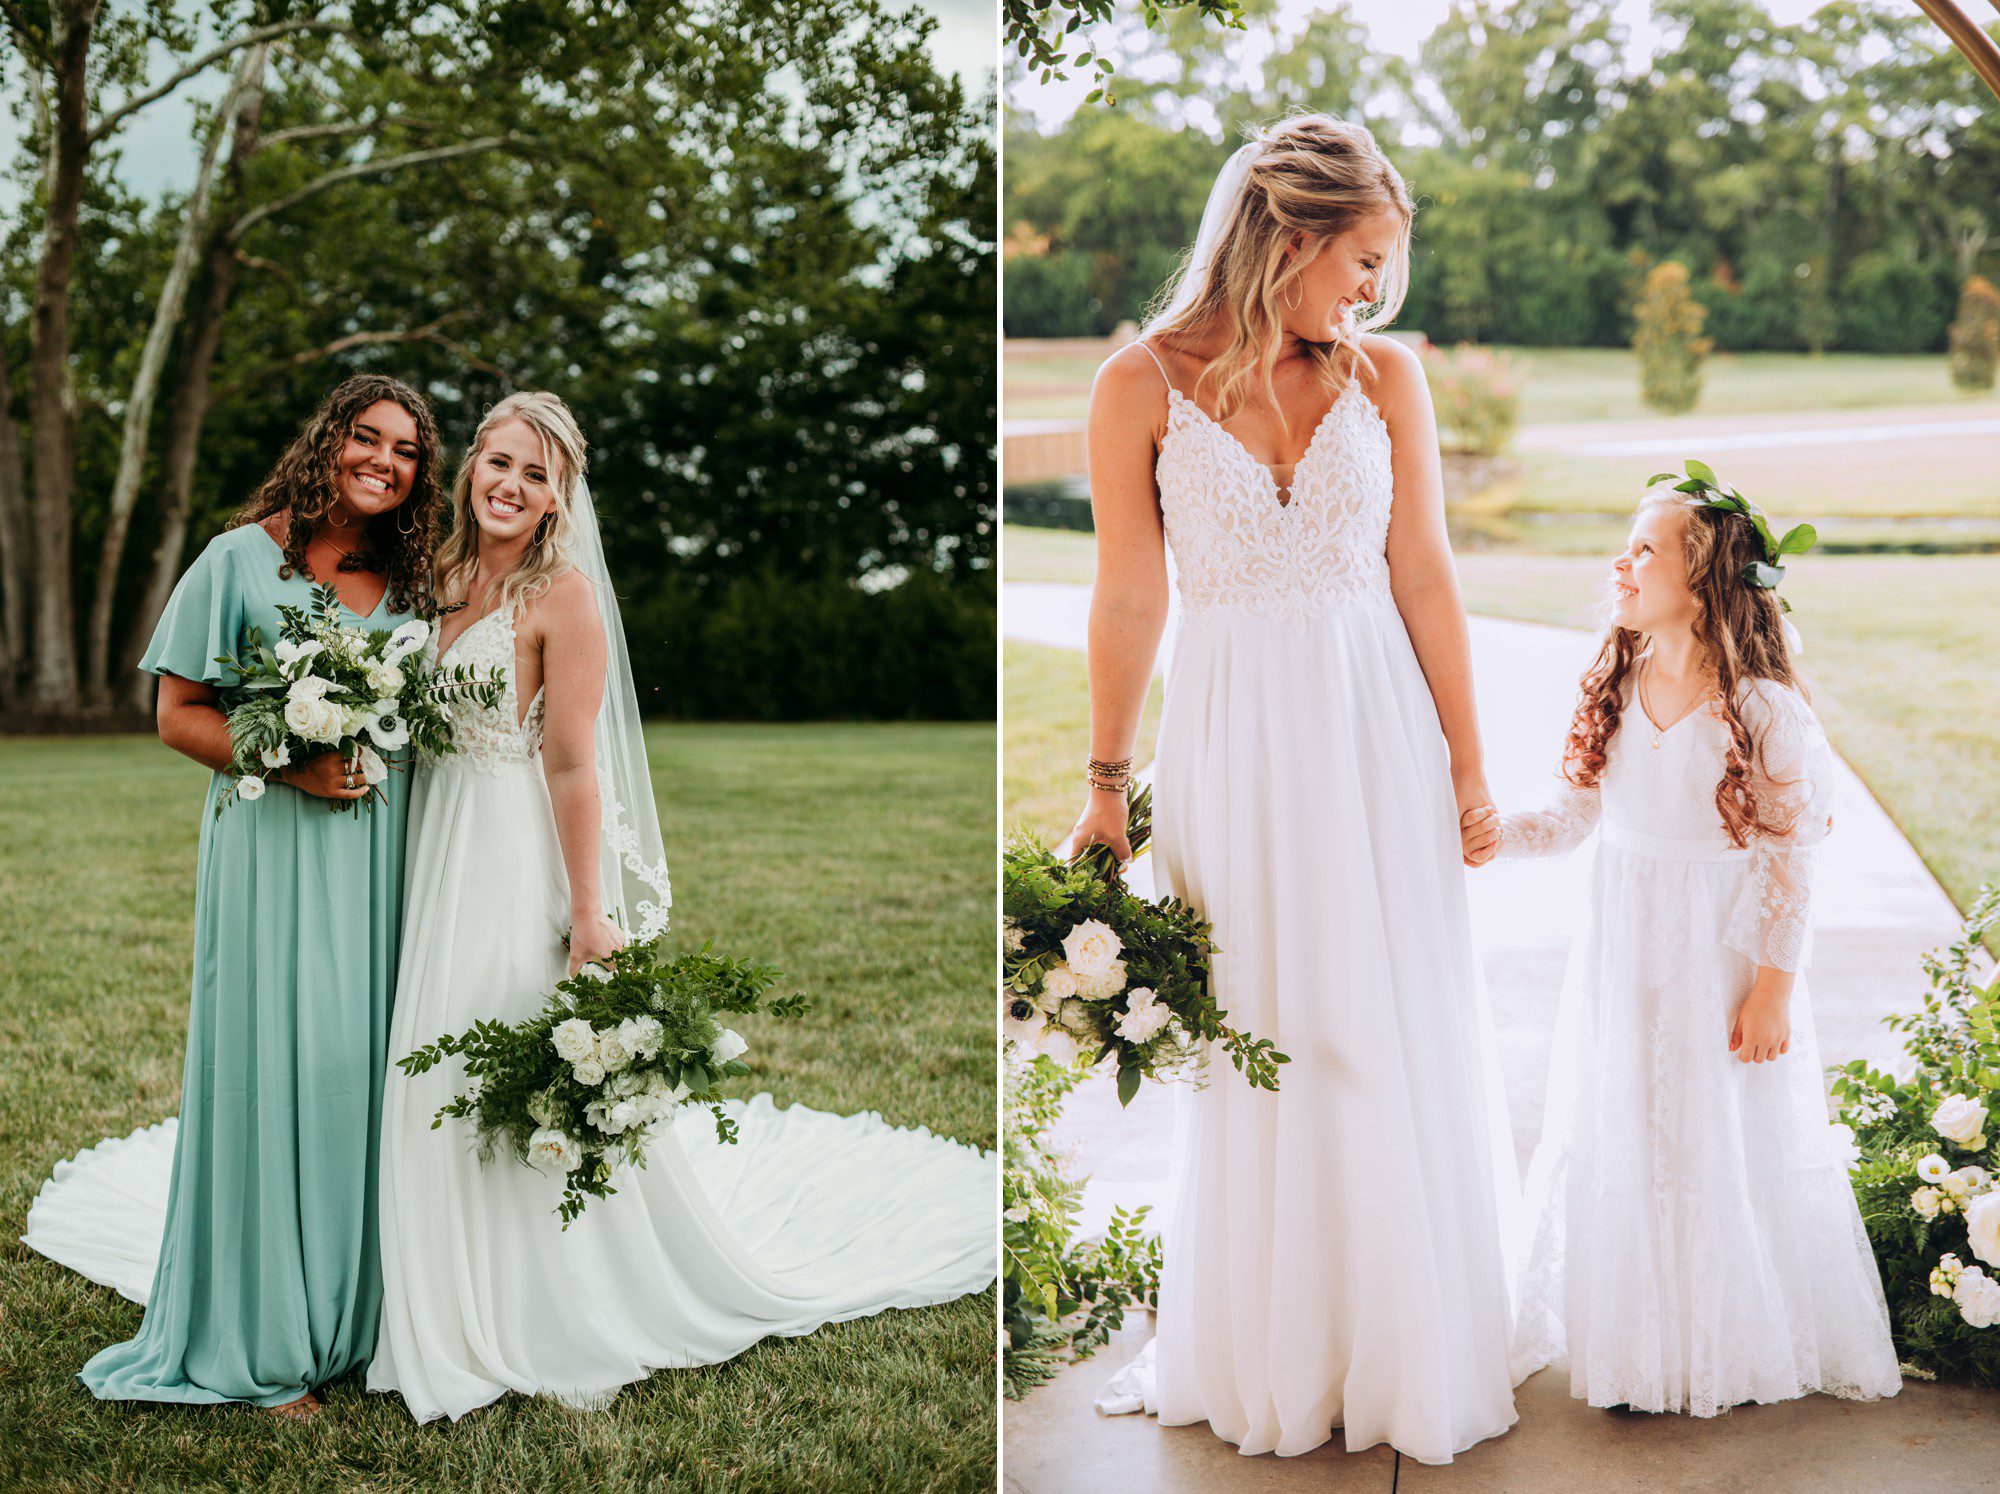 Aqua bridesmaid gown with white flower girl with greenery halo